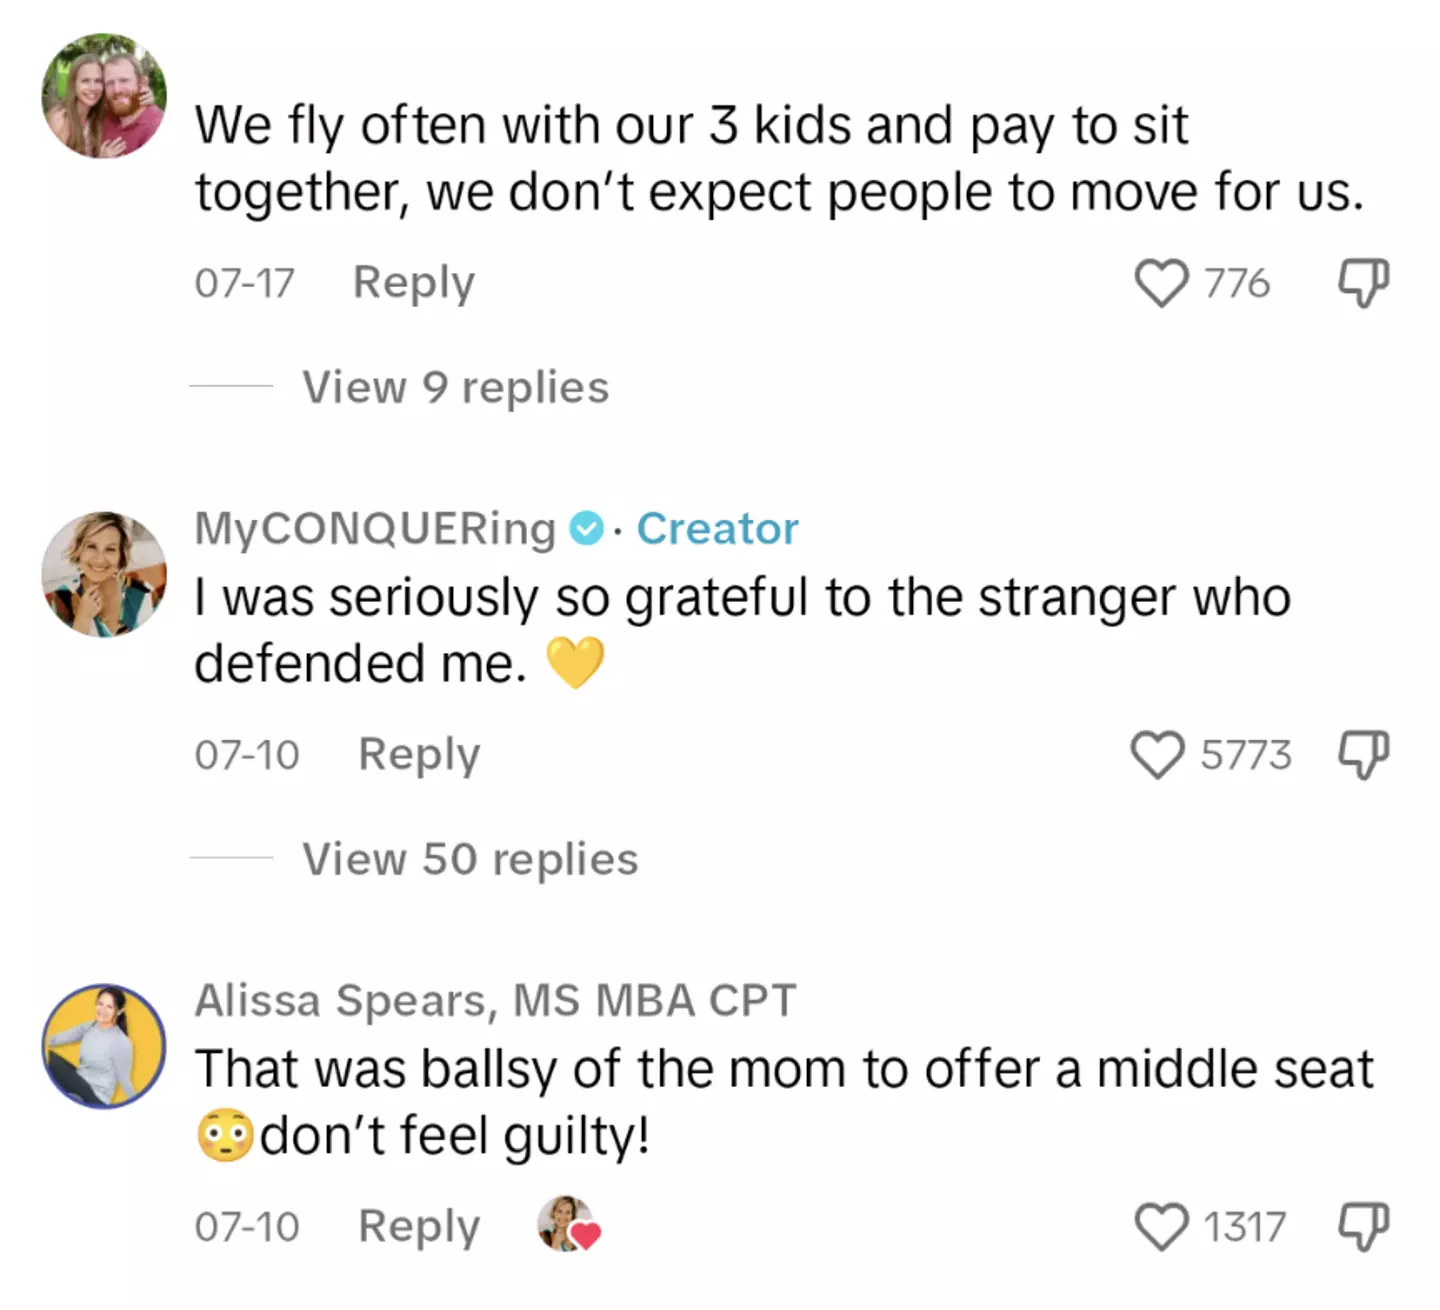 TikTok commenters praised the CEO for her actions.